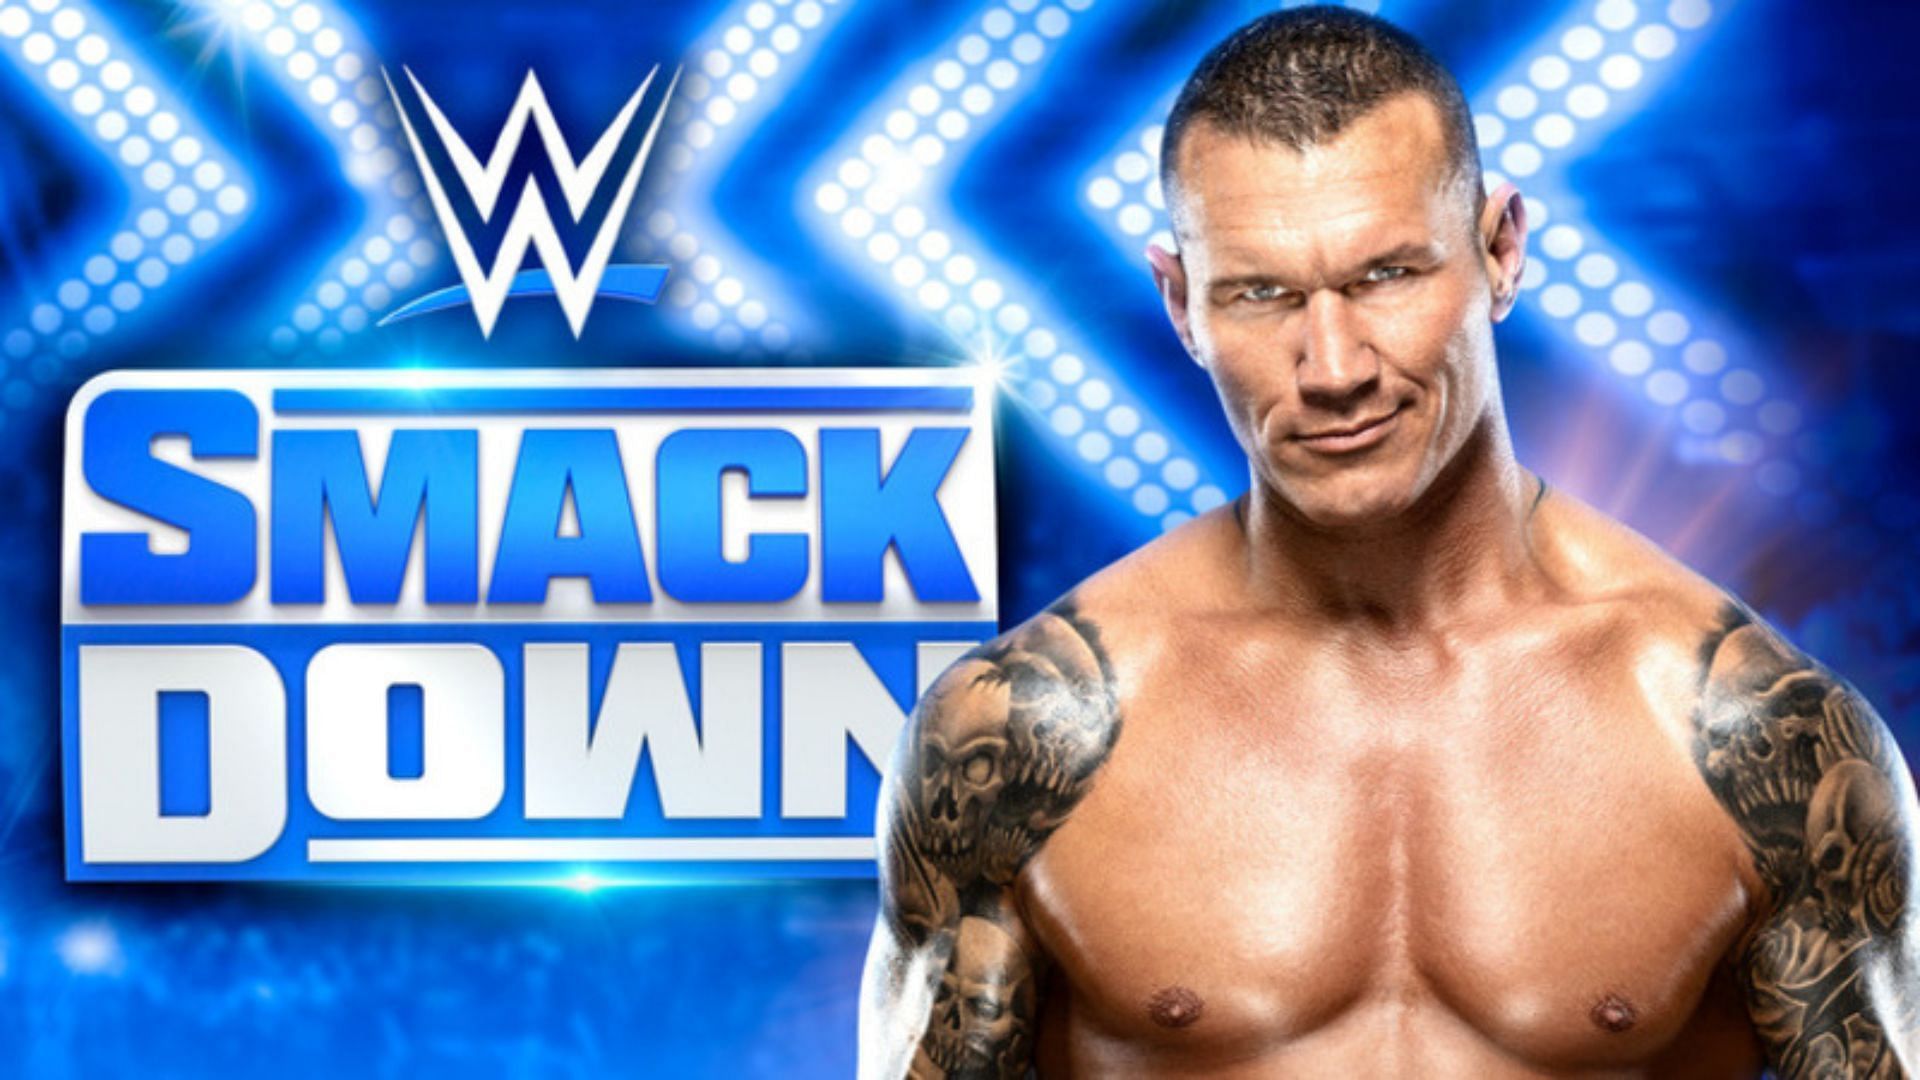 Randy Orton is advertised for SmackDown this week.